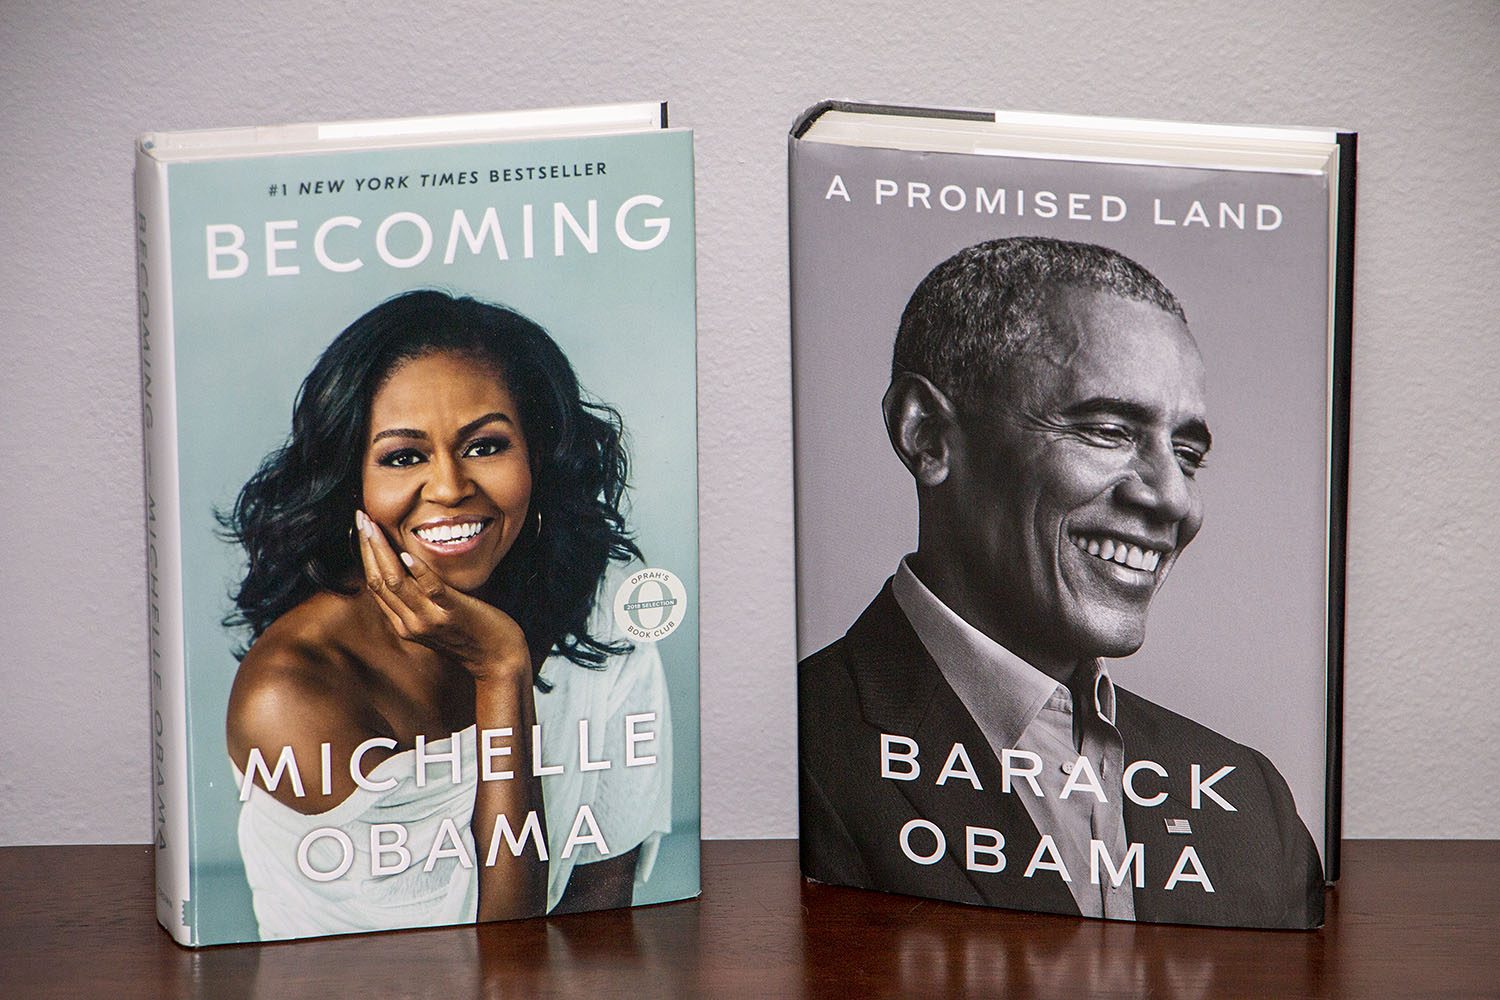 Becoming by Michelle Obama and A Promised Land by Barack Obama.